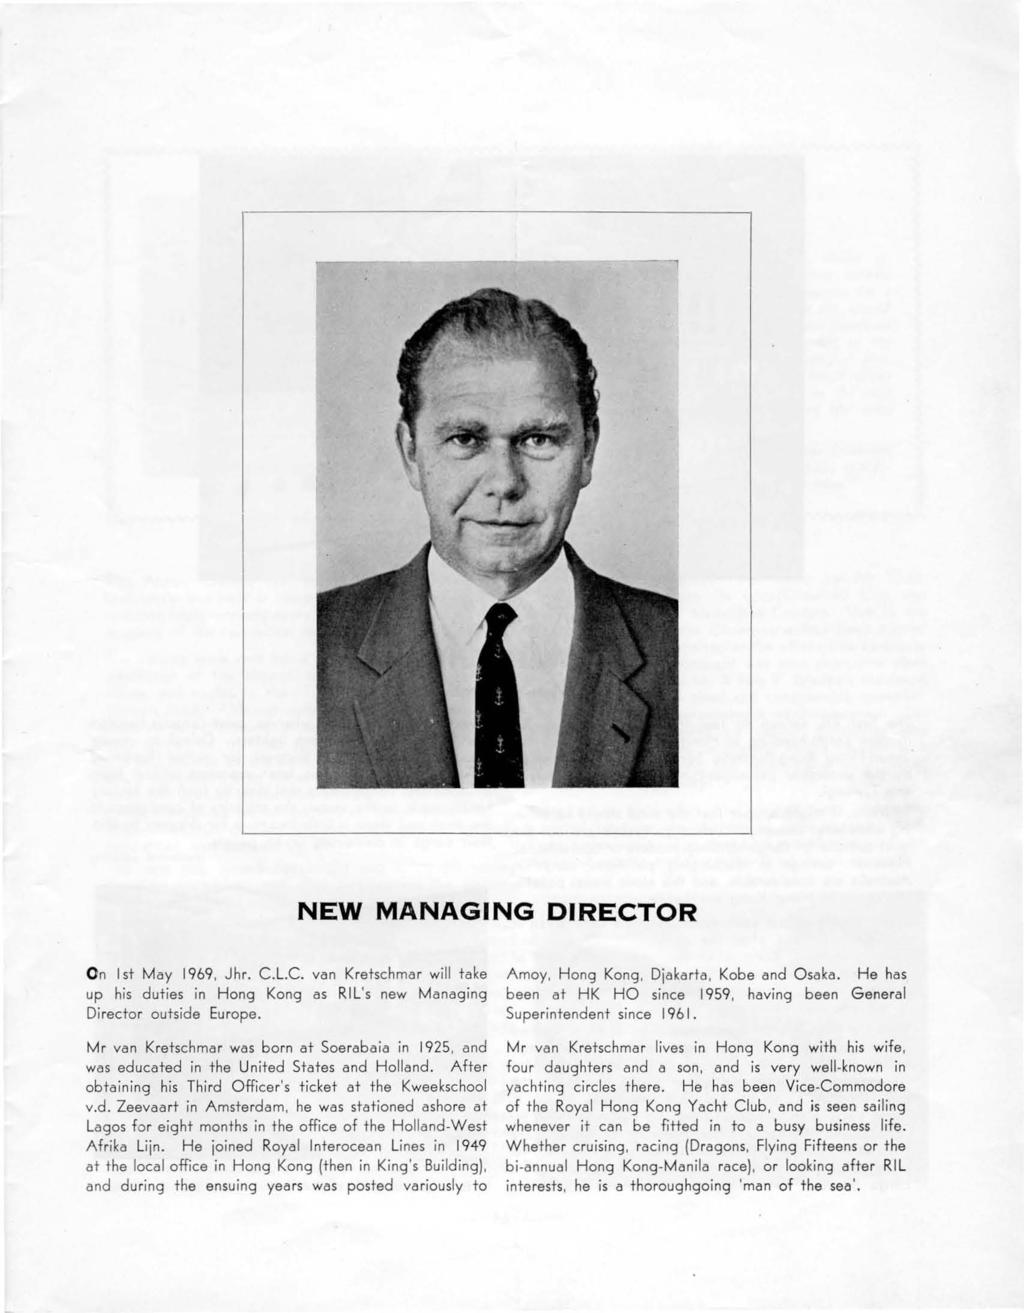 NEW MANAGING DIRECTOR On I si May 1969, Jhr. C.L.c. van Krelschmar will lake up his dutjes in Hang Kong as RIL's new Managing Director outside Europe.